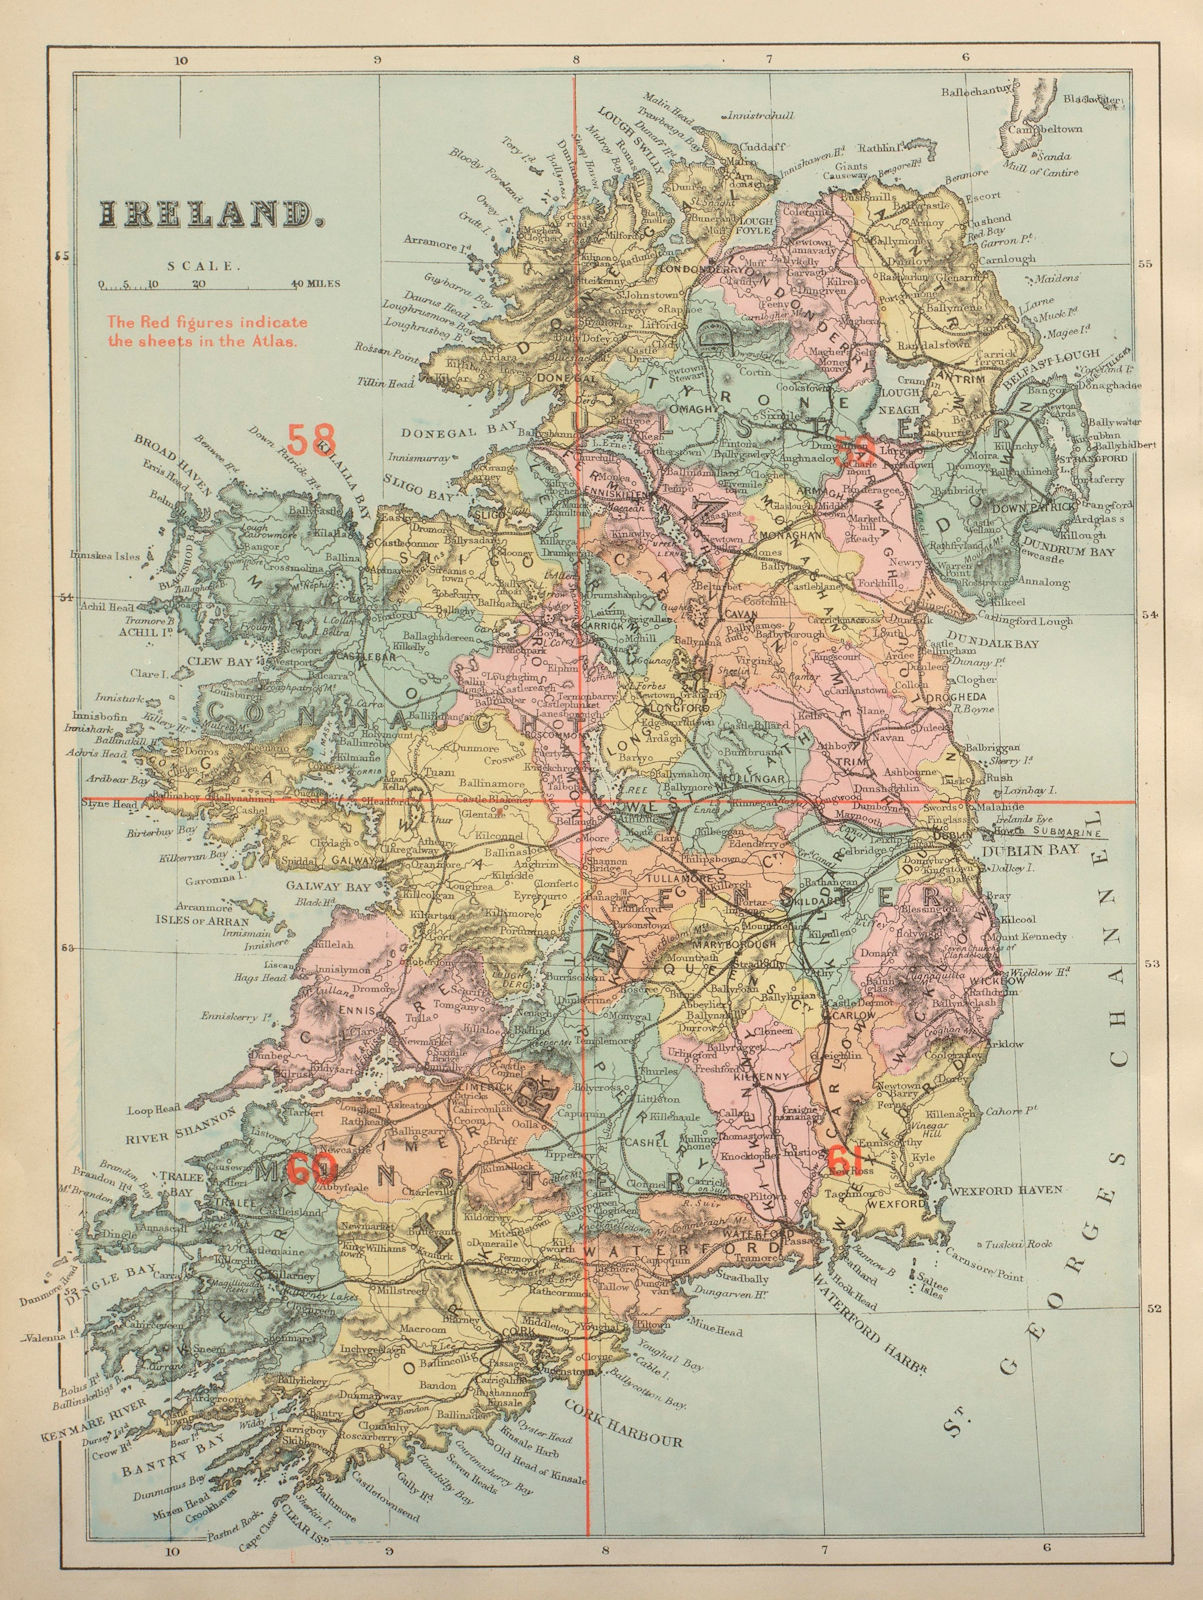 Associate Product IRELAND antique index map by GW BACON 1885 old vintage plan chart